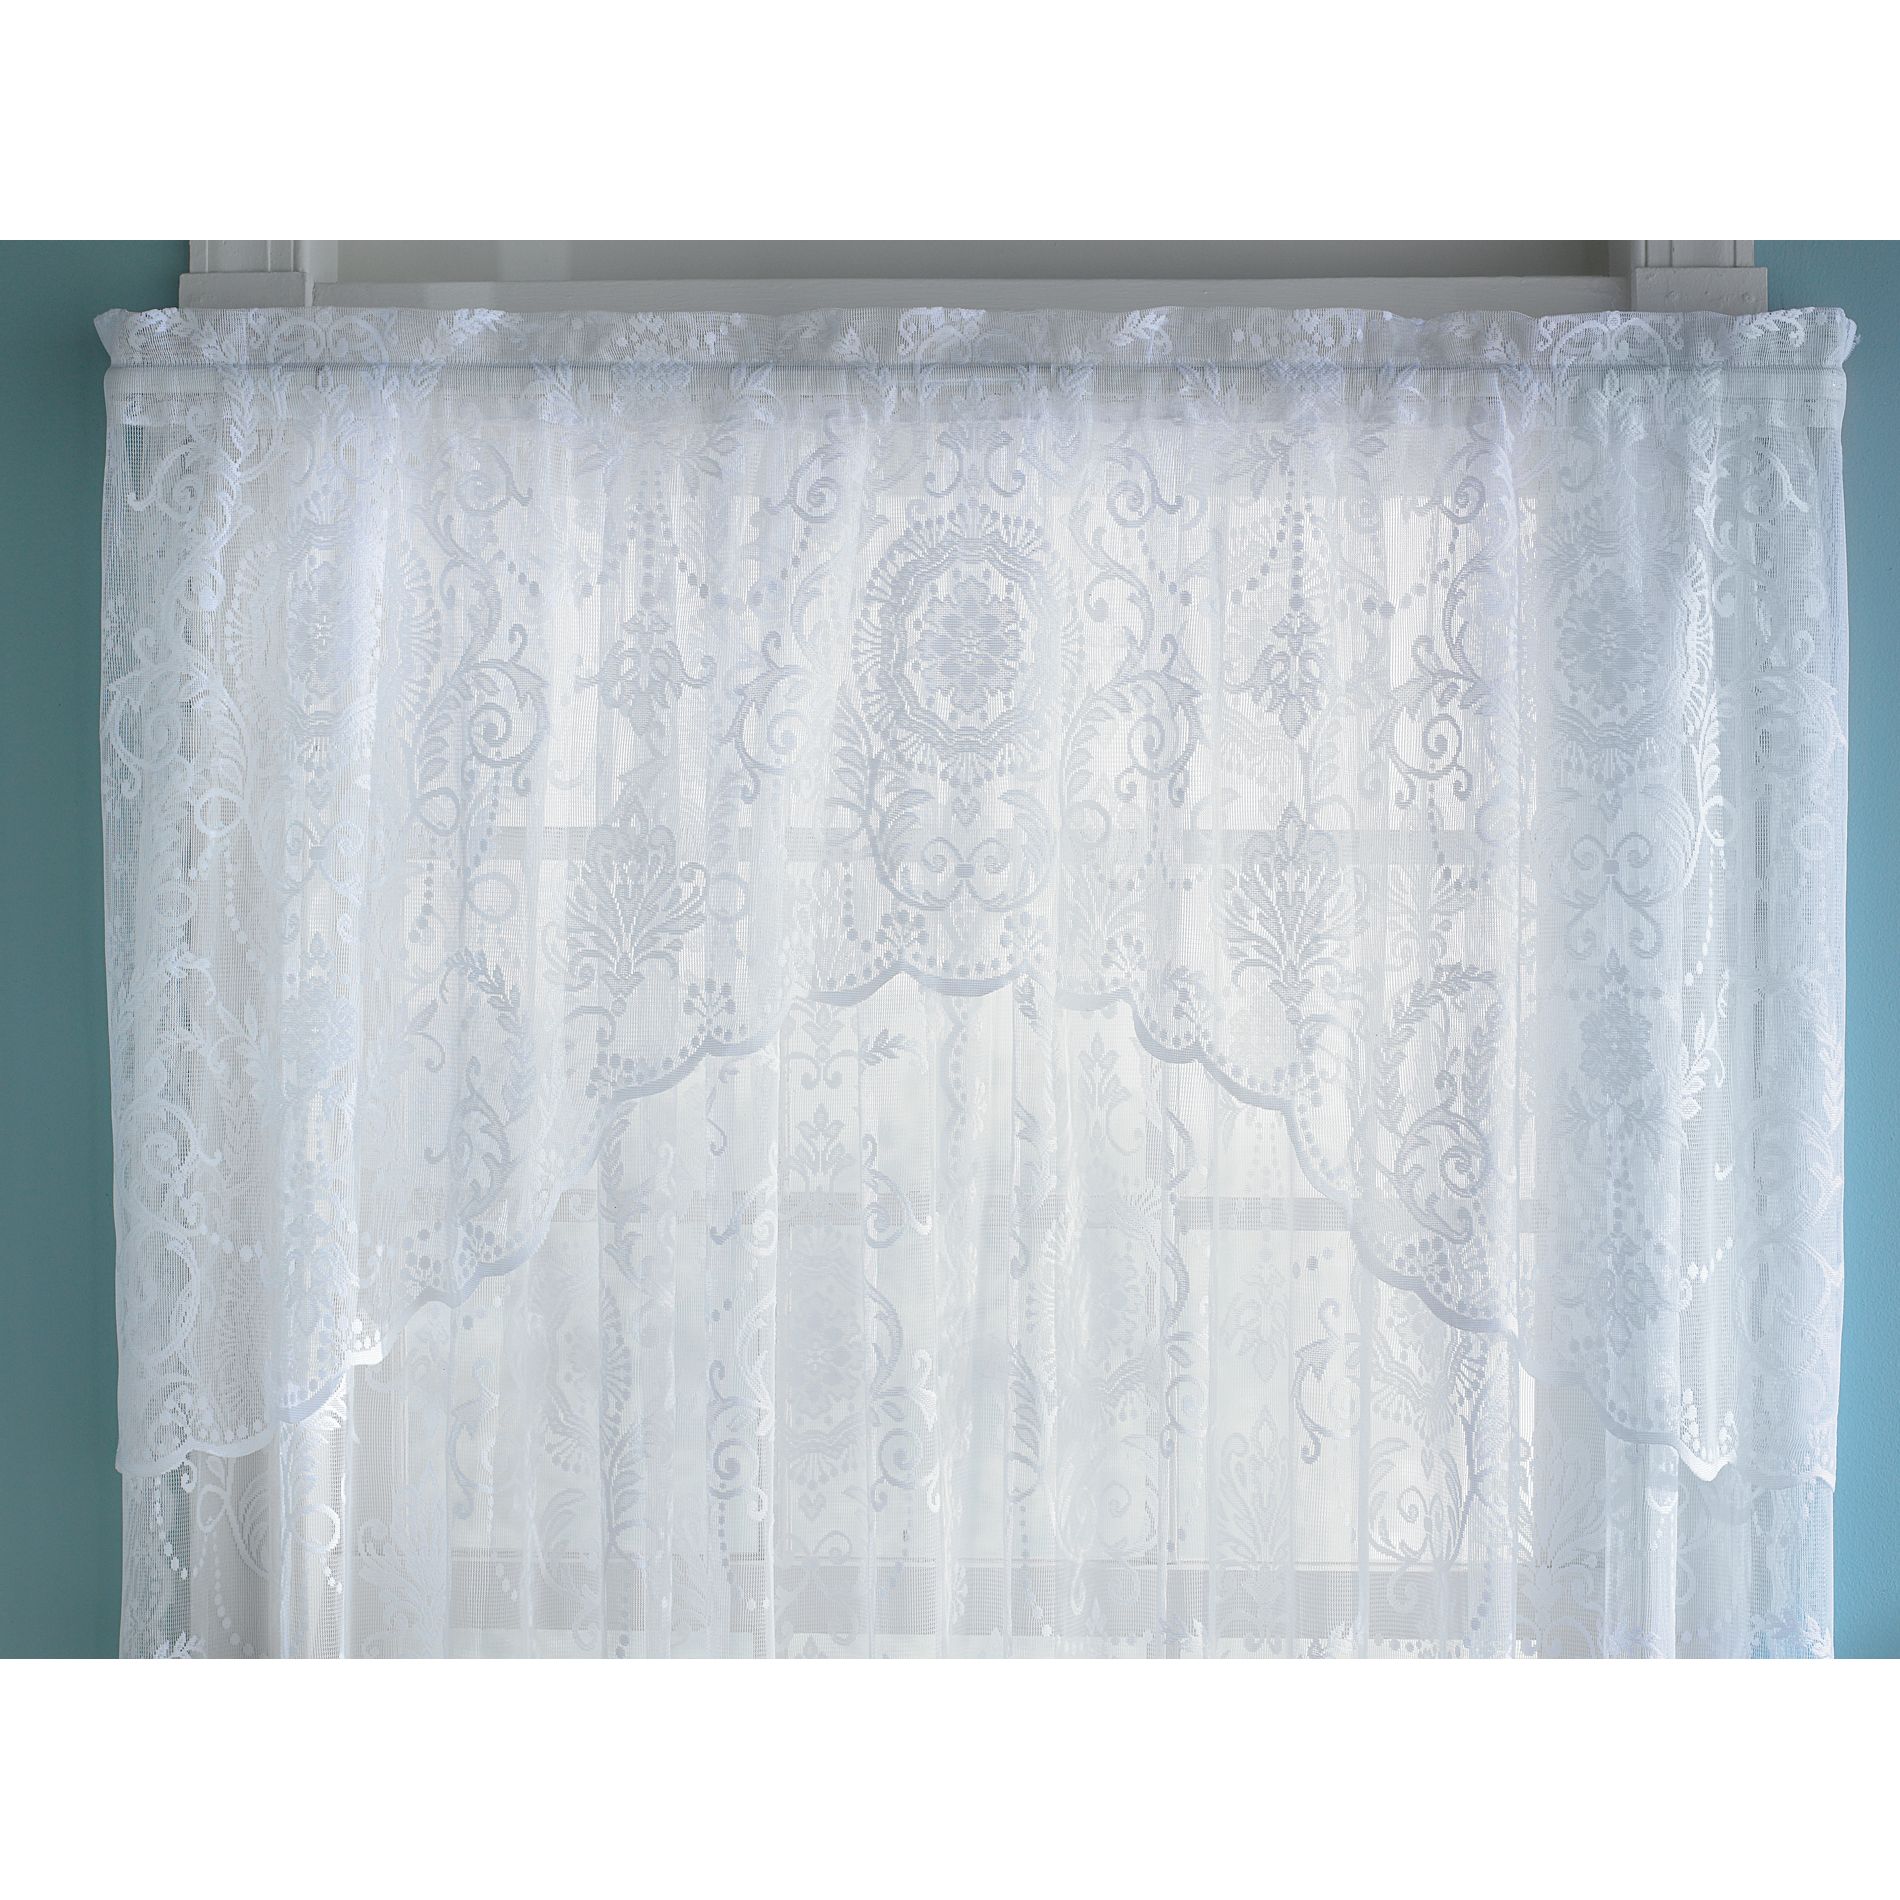 Essential Home Coraline Lace Window Valance Curtain